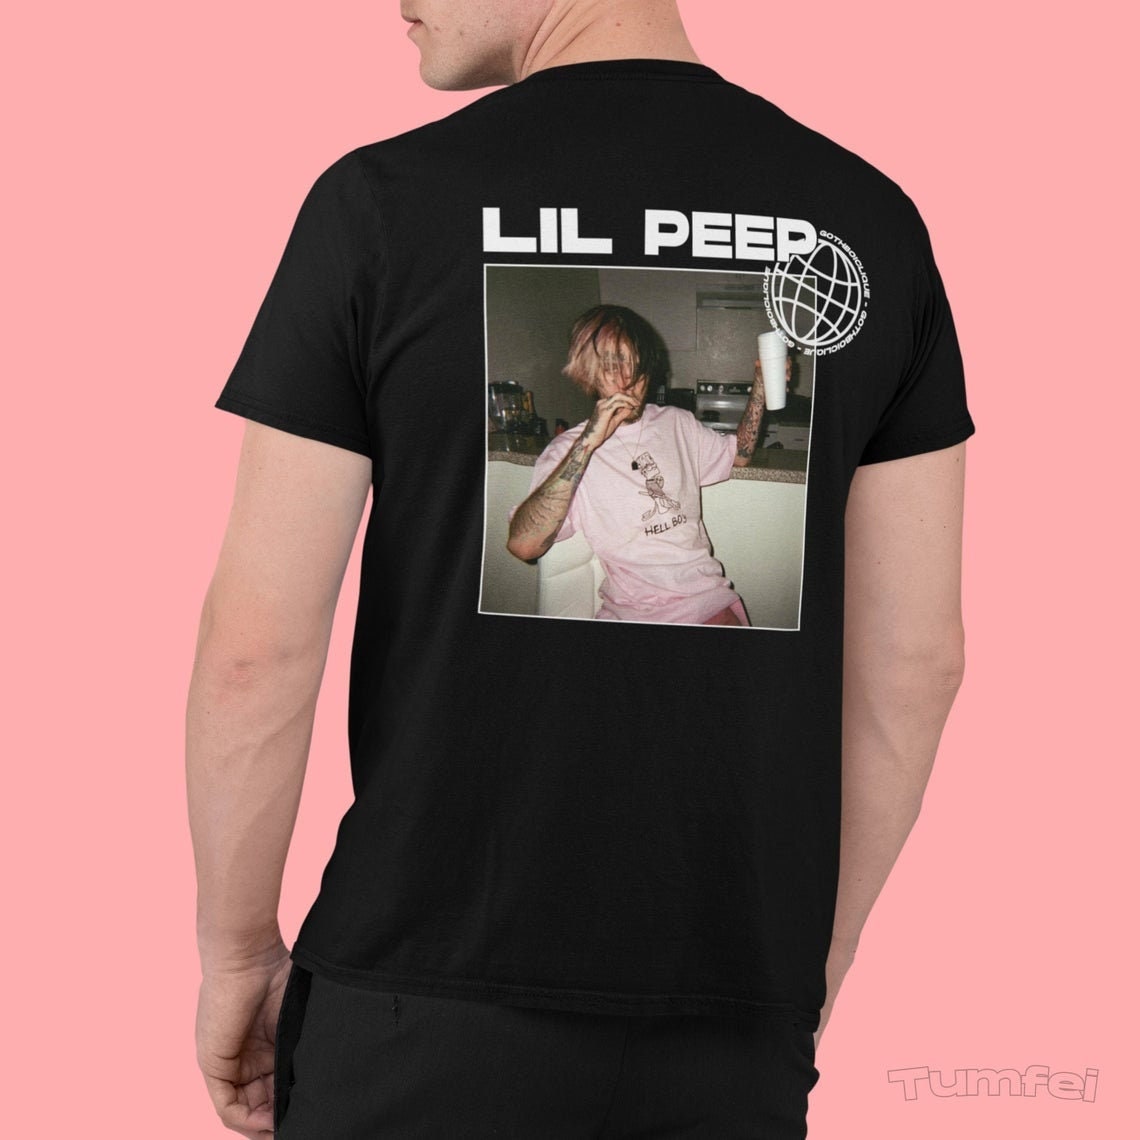 I need that shirt : r/LilPeep